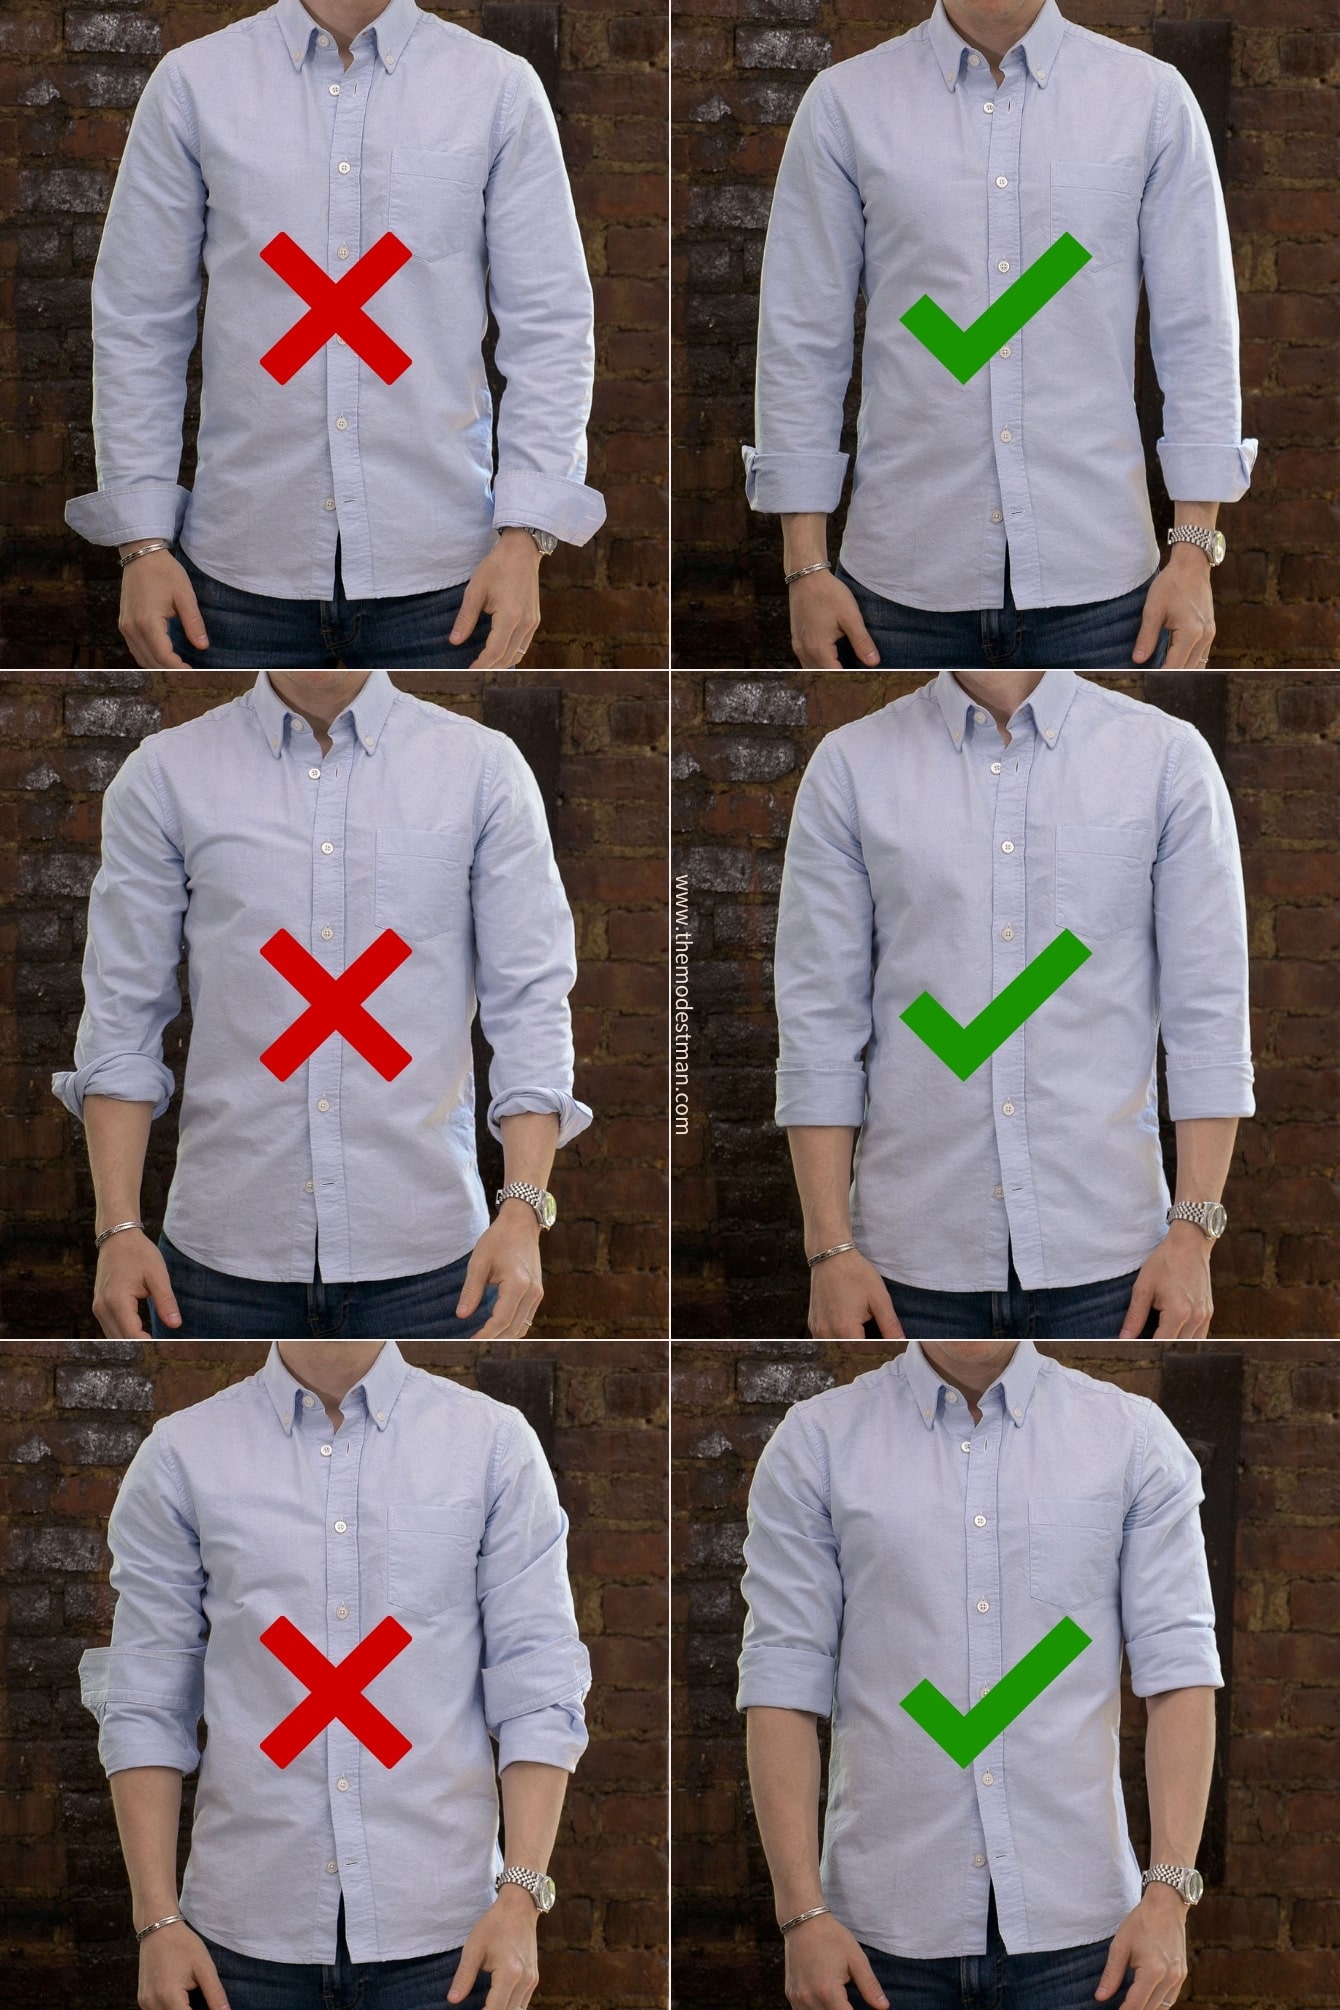 Pushing or rolling the sleeves of a blouse or shirt up